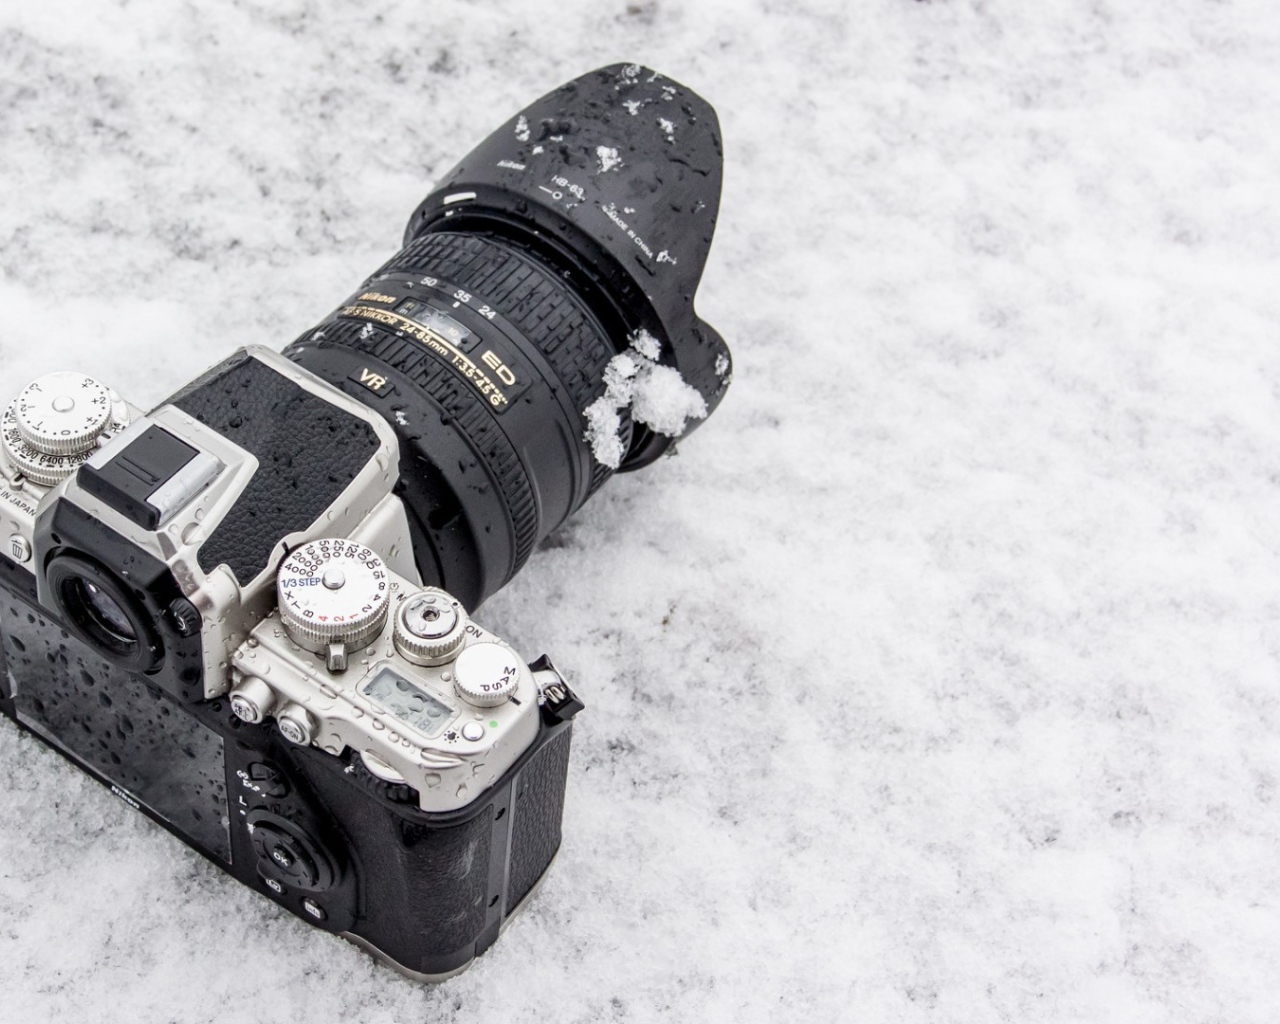 The camera lies in the snow